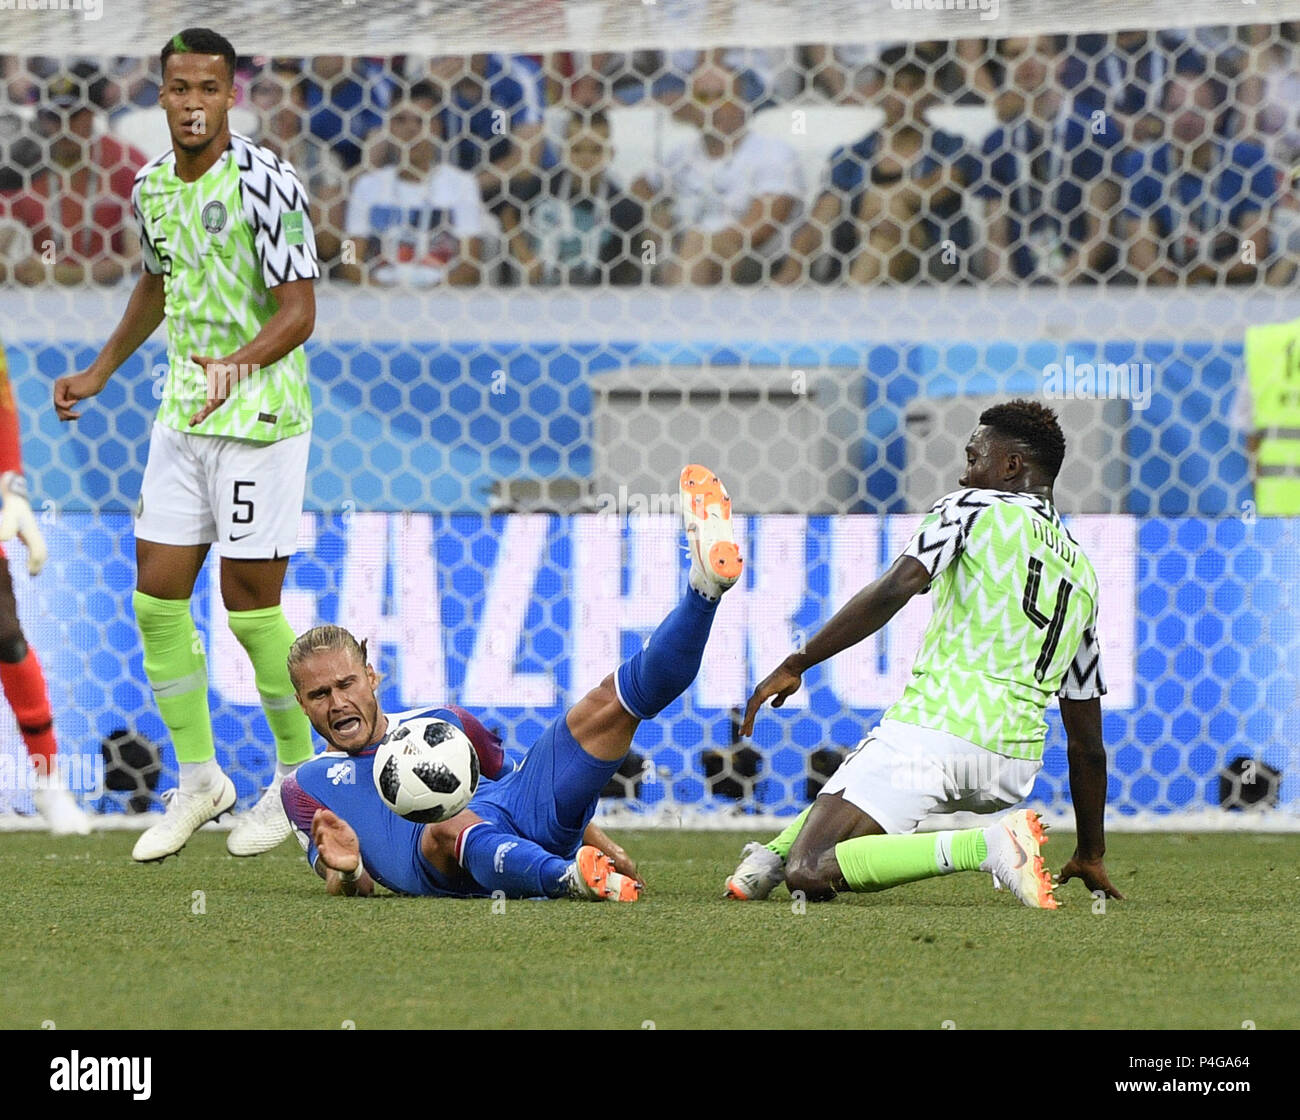 Volgograd, Russia. 22nd June, 2018. Wilfred Ndidi (R) of Nigeria vies with Rurik Gislason (C) of Iceland during the 2018 FIFA World Cup Group D match between Nigeria and Iceland in Volgograd, Russia, June 22, 2018. Nigeria won 2-0. Credit: Lui Siu Wai/Xinhua/Alamy Live News Stock Photo